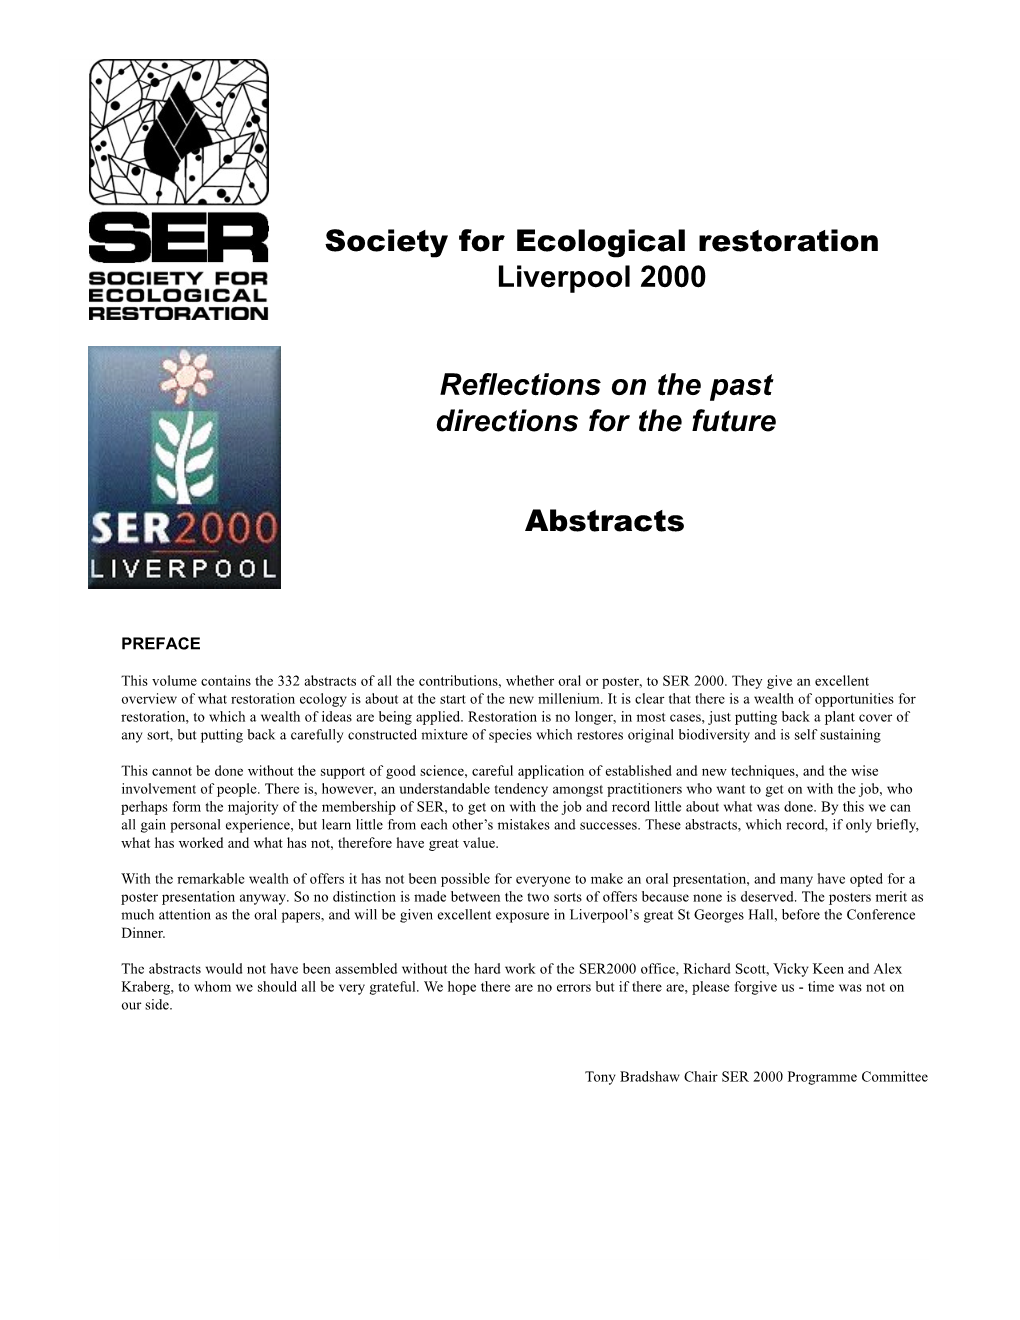 Society for Ecological Restoration Liverpool 2000 Reflections on the Past Directions for the Future Abstracts